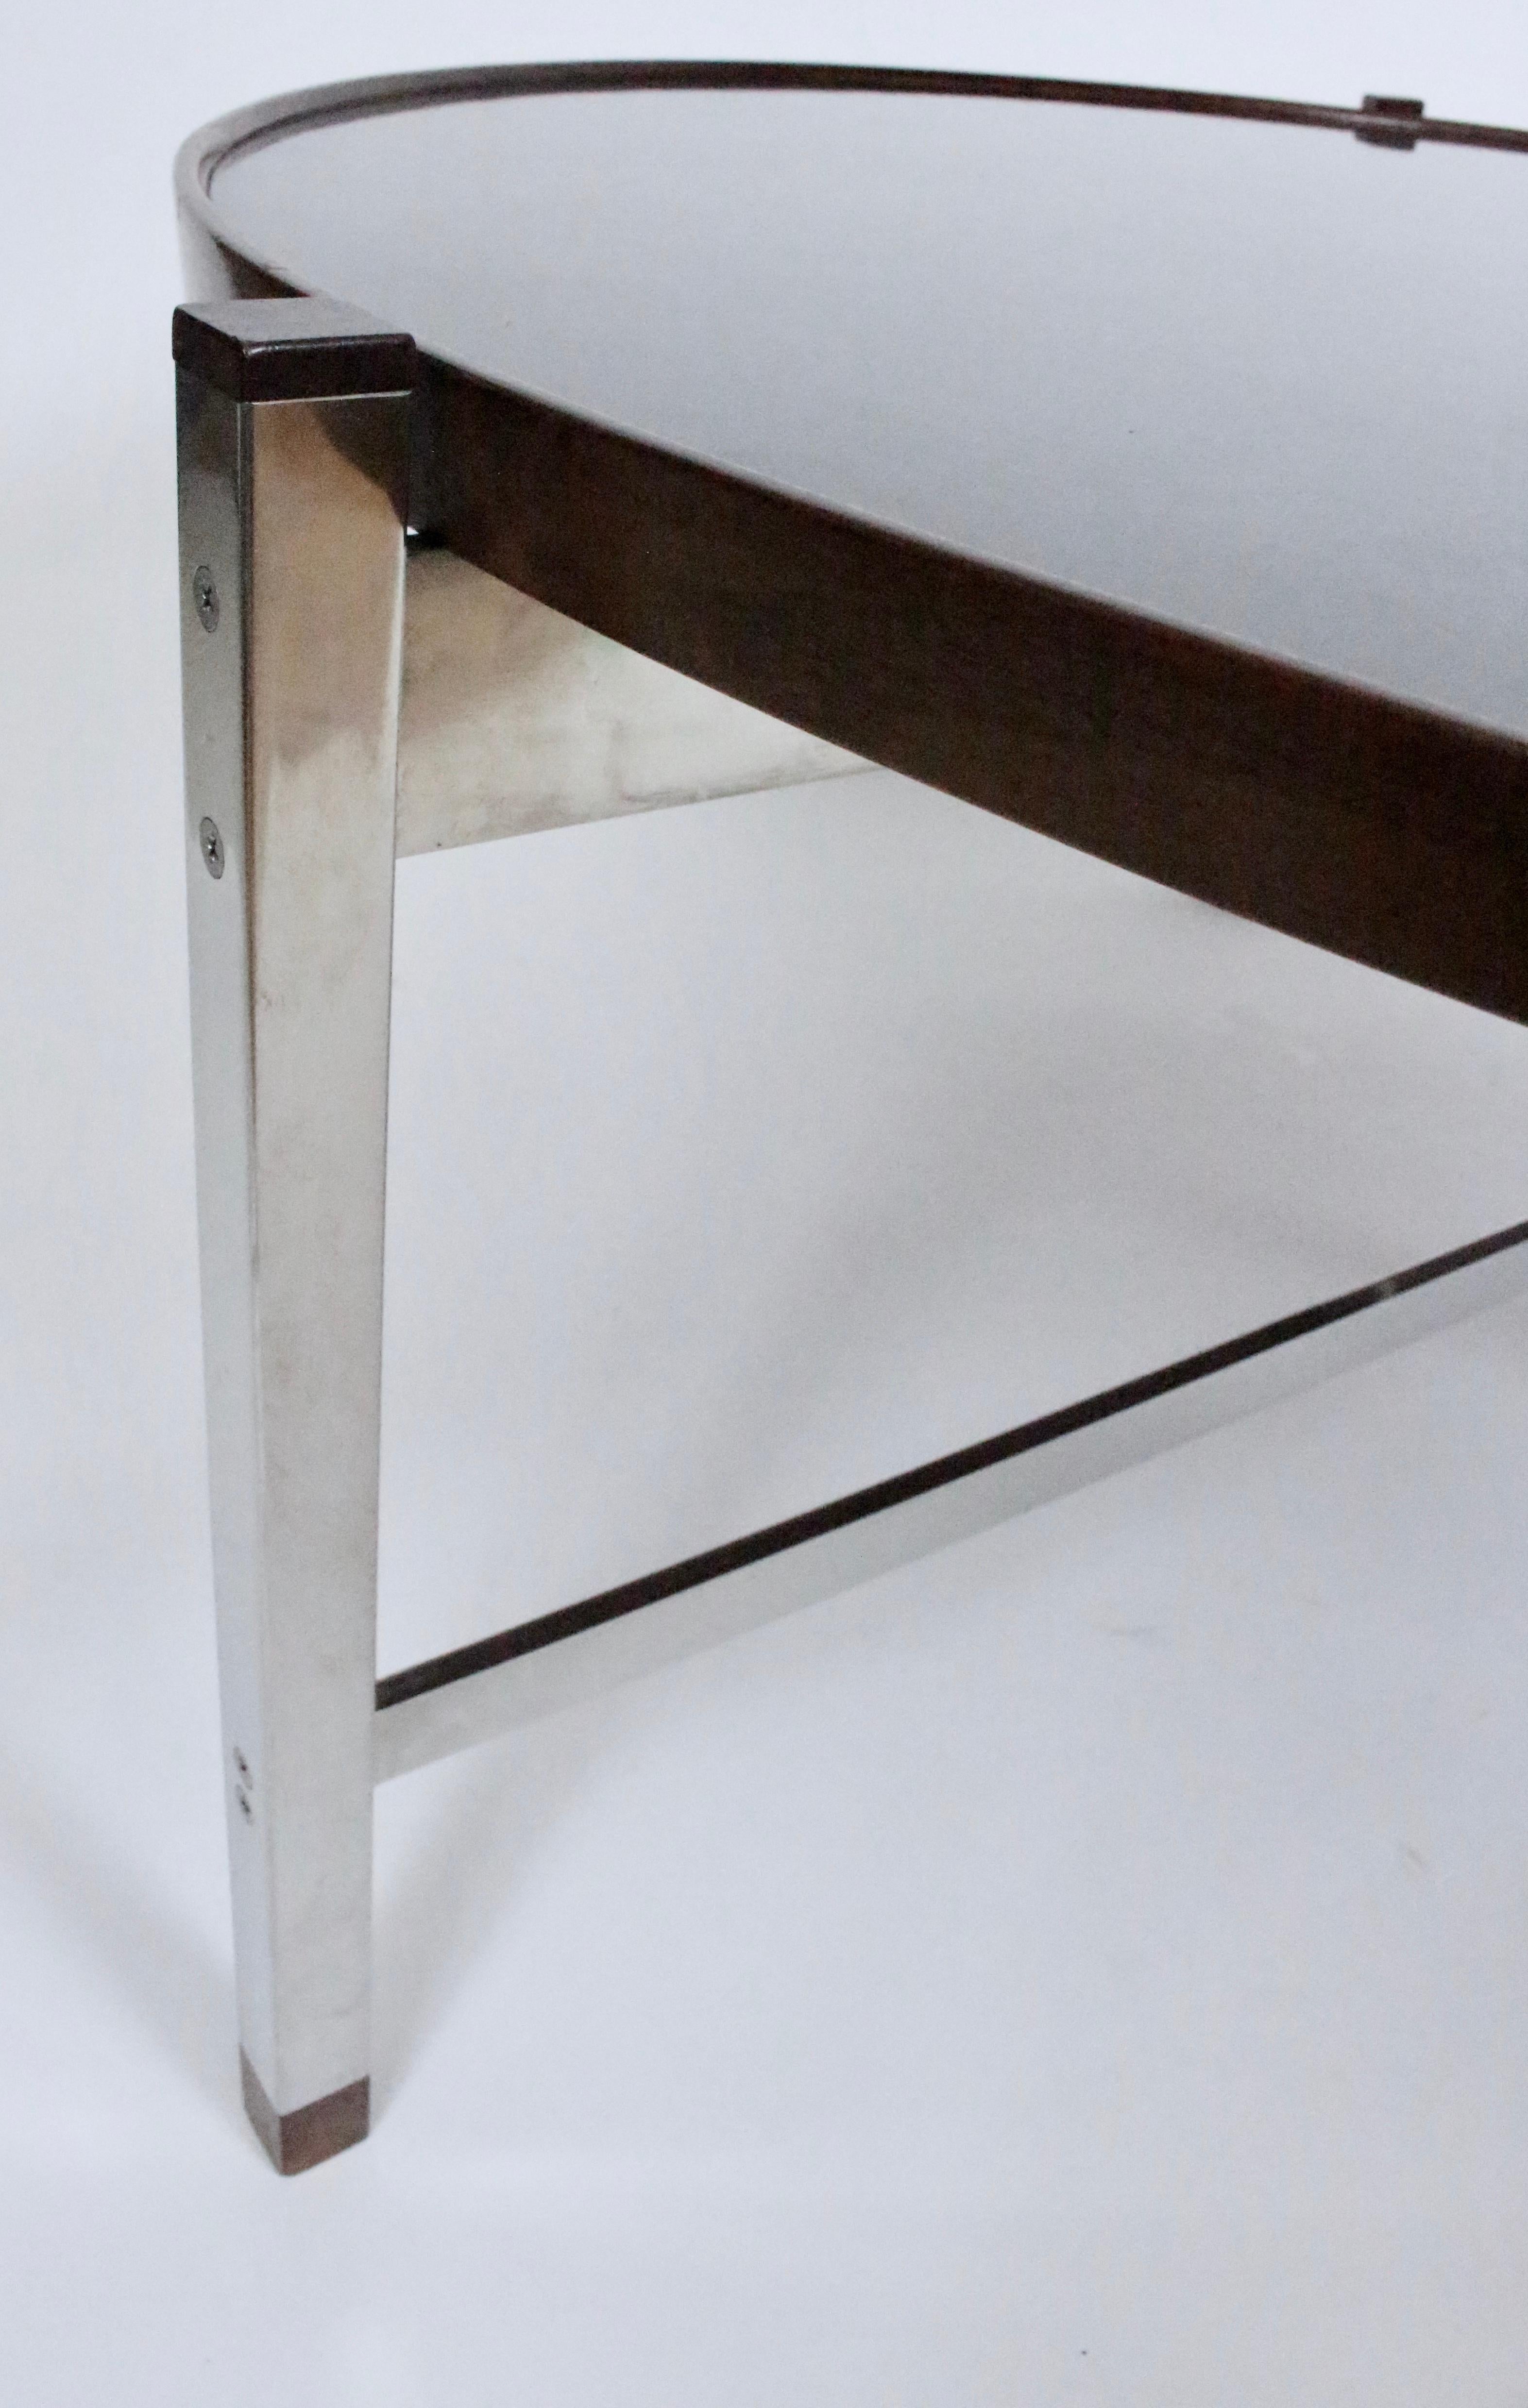 Glass Edward Wormley for Dunbar Rosewood, Chrome and Black Micarta Coffee Table, 1950s